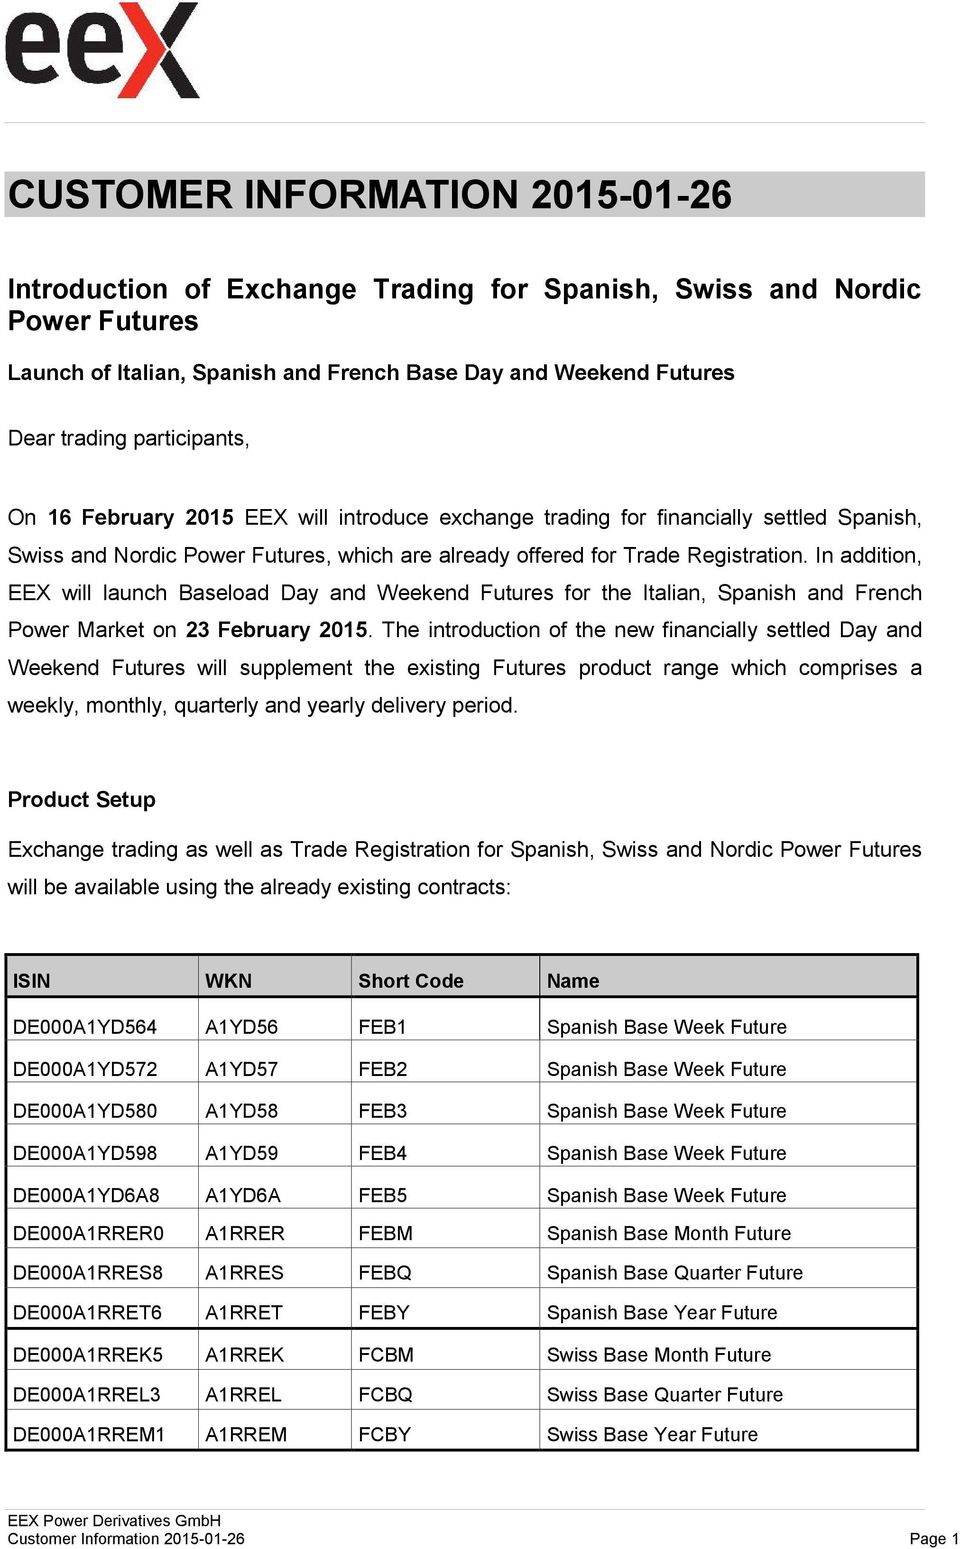 In addition, EEX will launch Baseload Day and Weekend Futures for the Italian, Spanish and French Power Market on 23 February 2015.